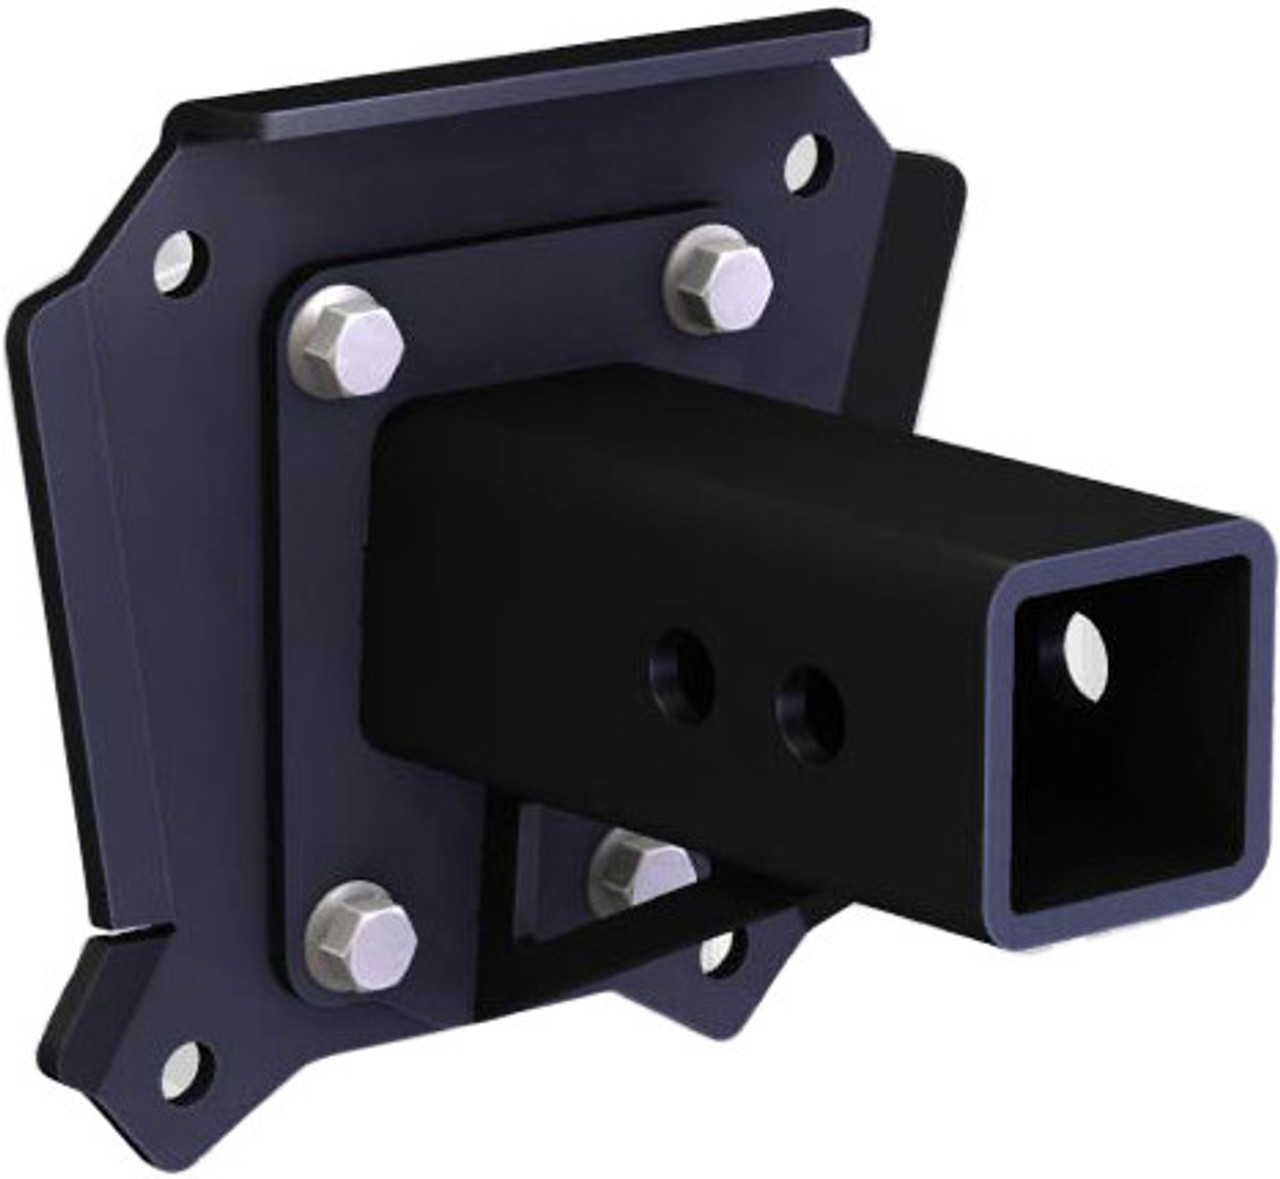 Kfi New Rear Receiver Hitch, 10-1200